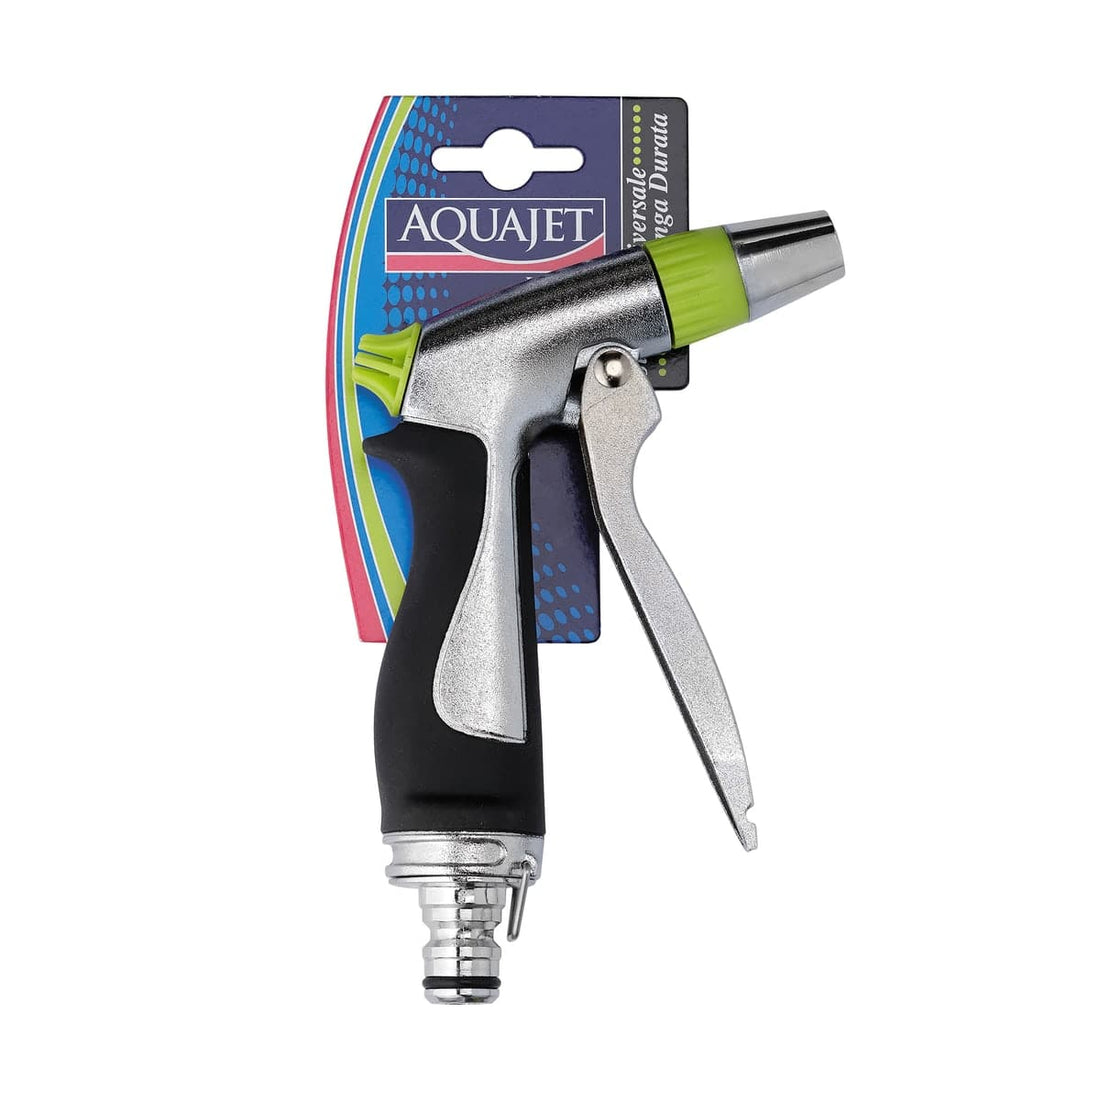 DELUX CHROME-PLATED METAL PISTOL WITH COMFORT GRIP AND COLOUR-ADJUSTABLE SPRAY JET